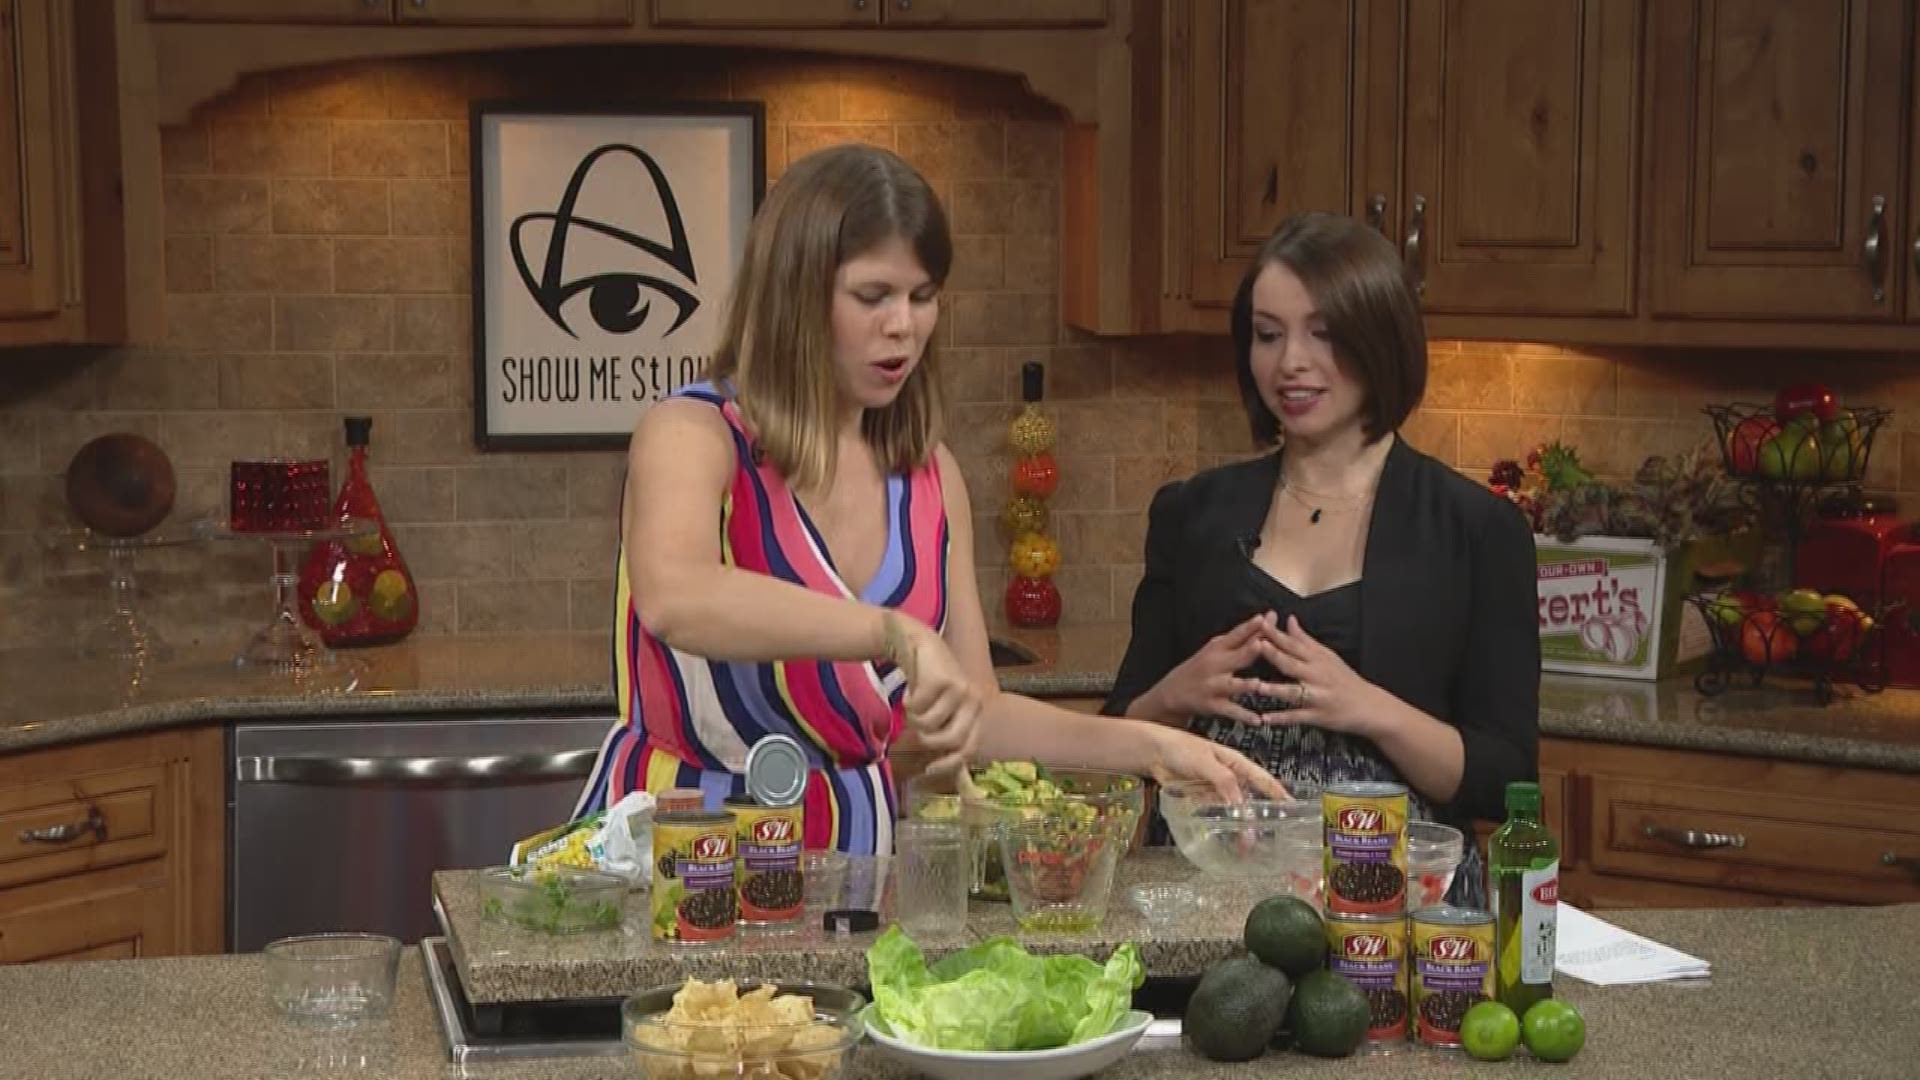 Looking for an easy way to lose weight without having to change other habits? Our favorite Alexandra Caspero, a registered dietitians, cookbook author and owner of Delish Knowledge is here to show us A RECIPE to add more plant based foods to your diet.